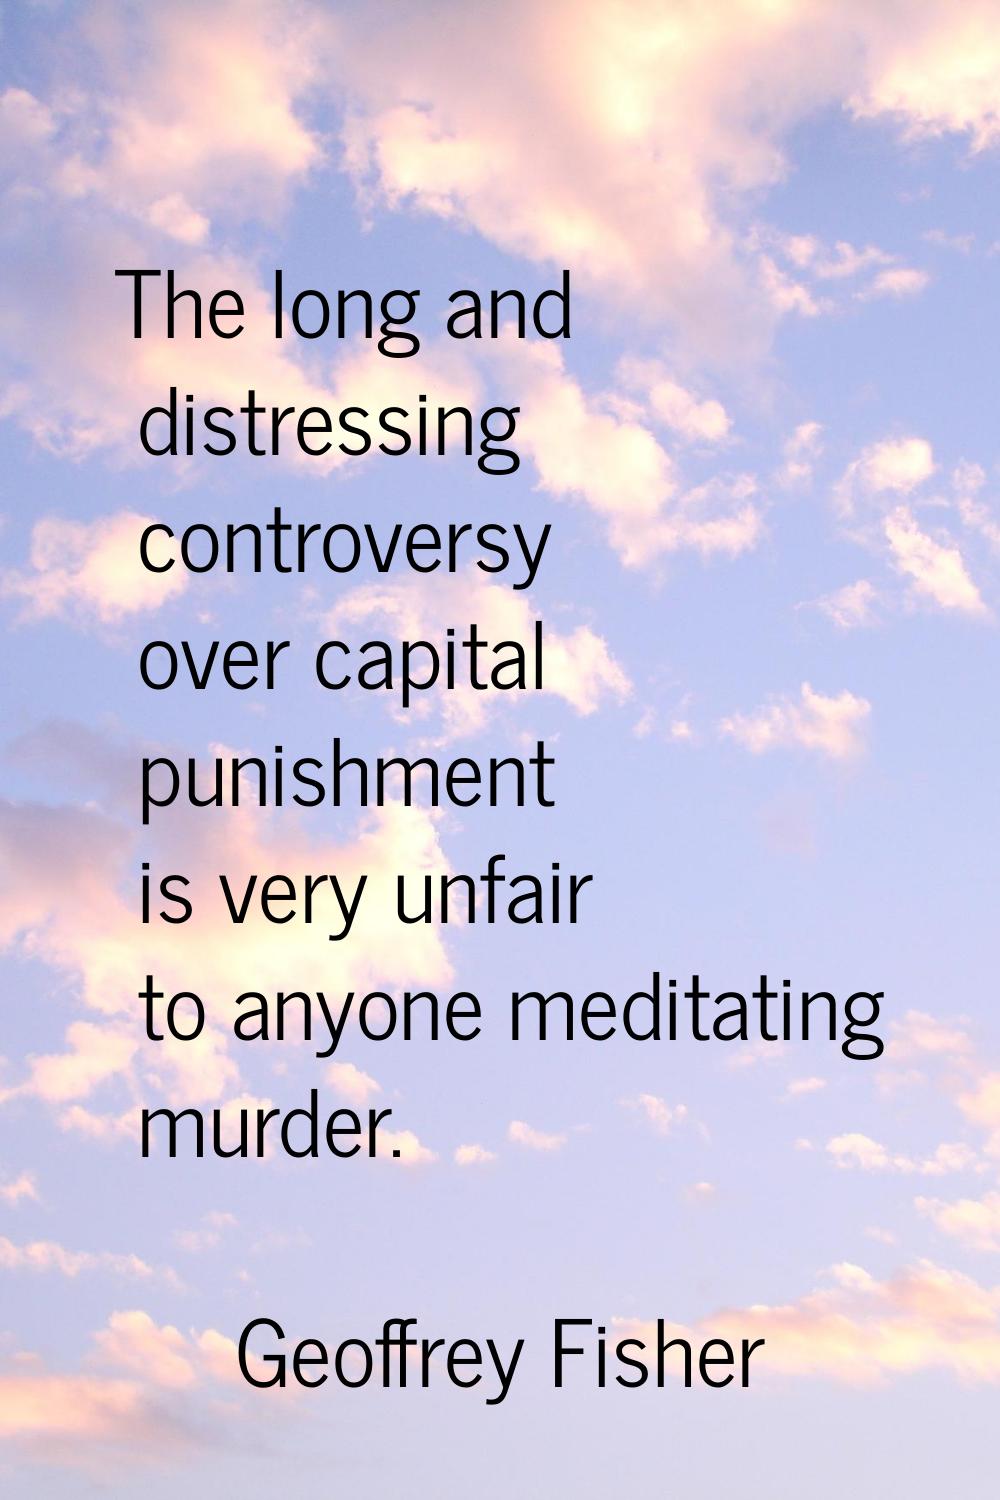 The long and distressing controversy over capital punishment is very unfair to anyone meditating mu